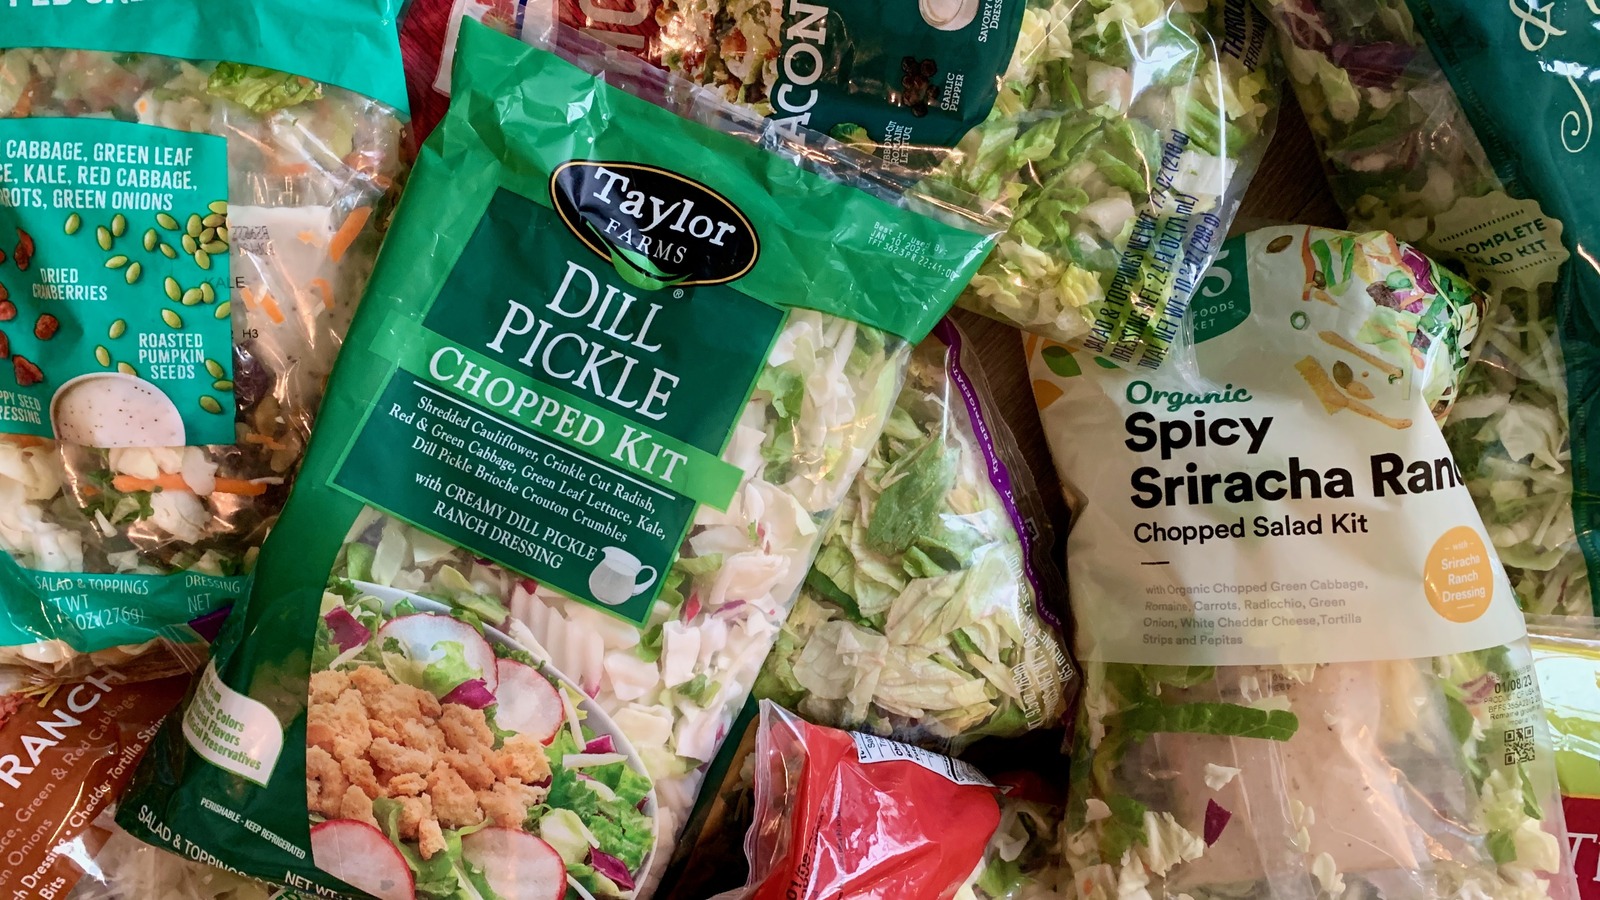 https://www.tastingtable.com/img/gallery/the-absolute-best-packaged-salad-kits-ranked/l-intro-1673280717.jpg